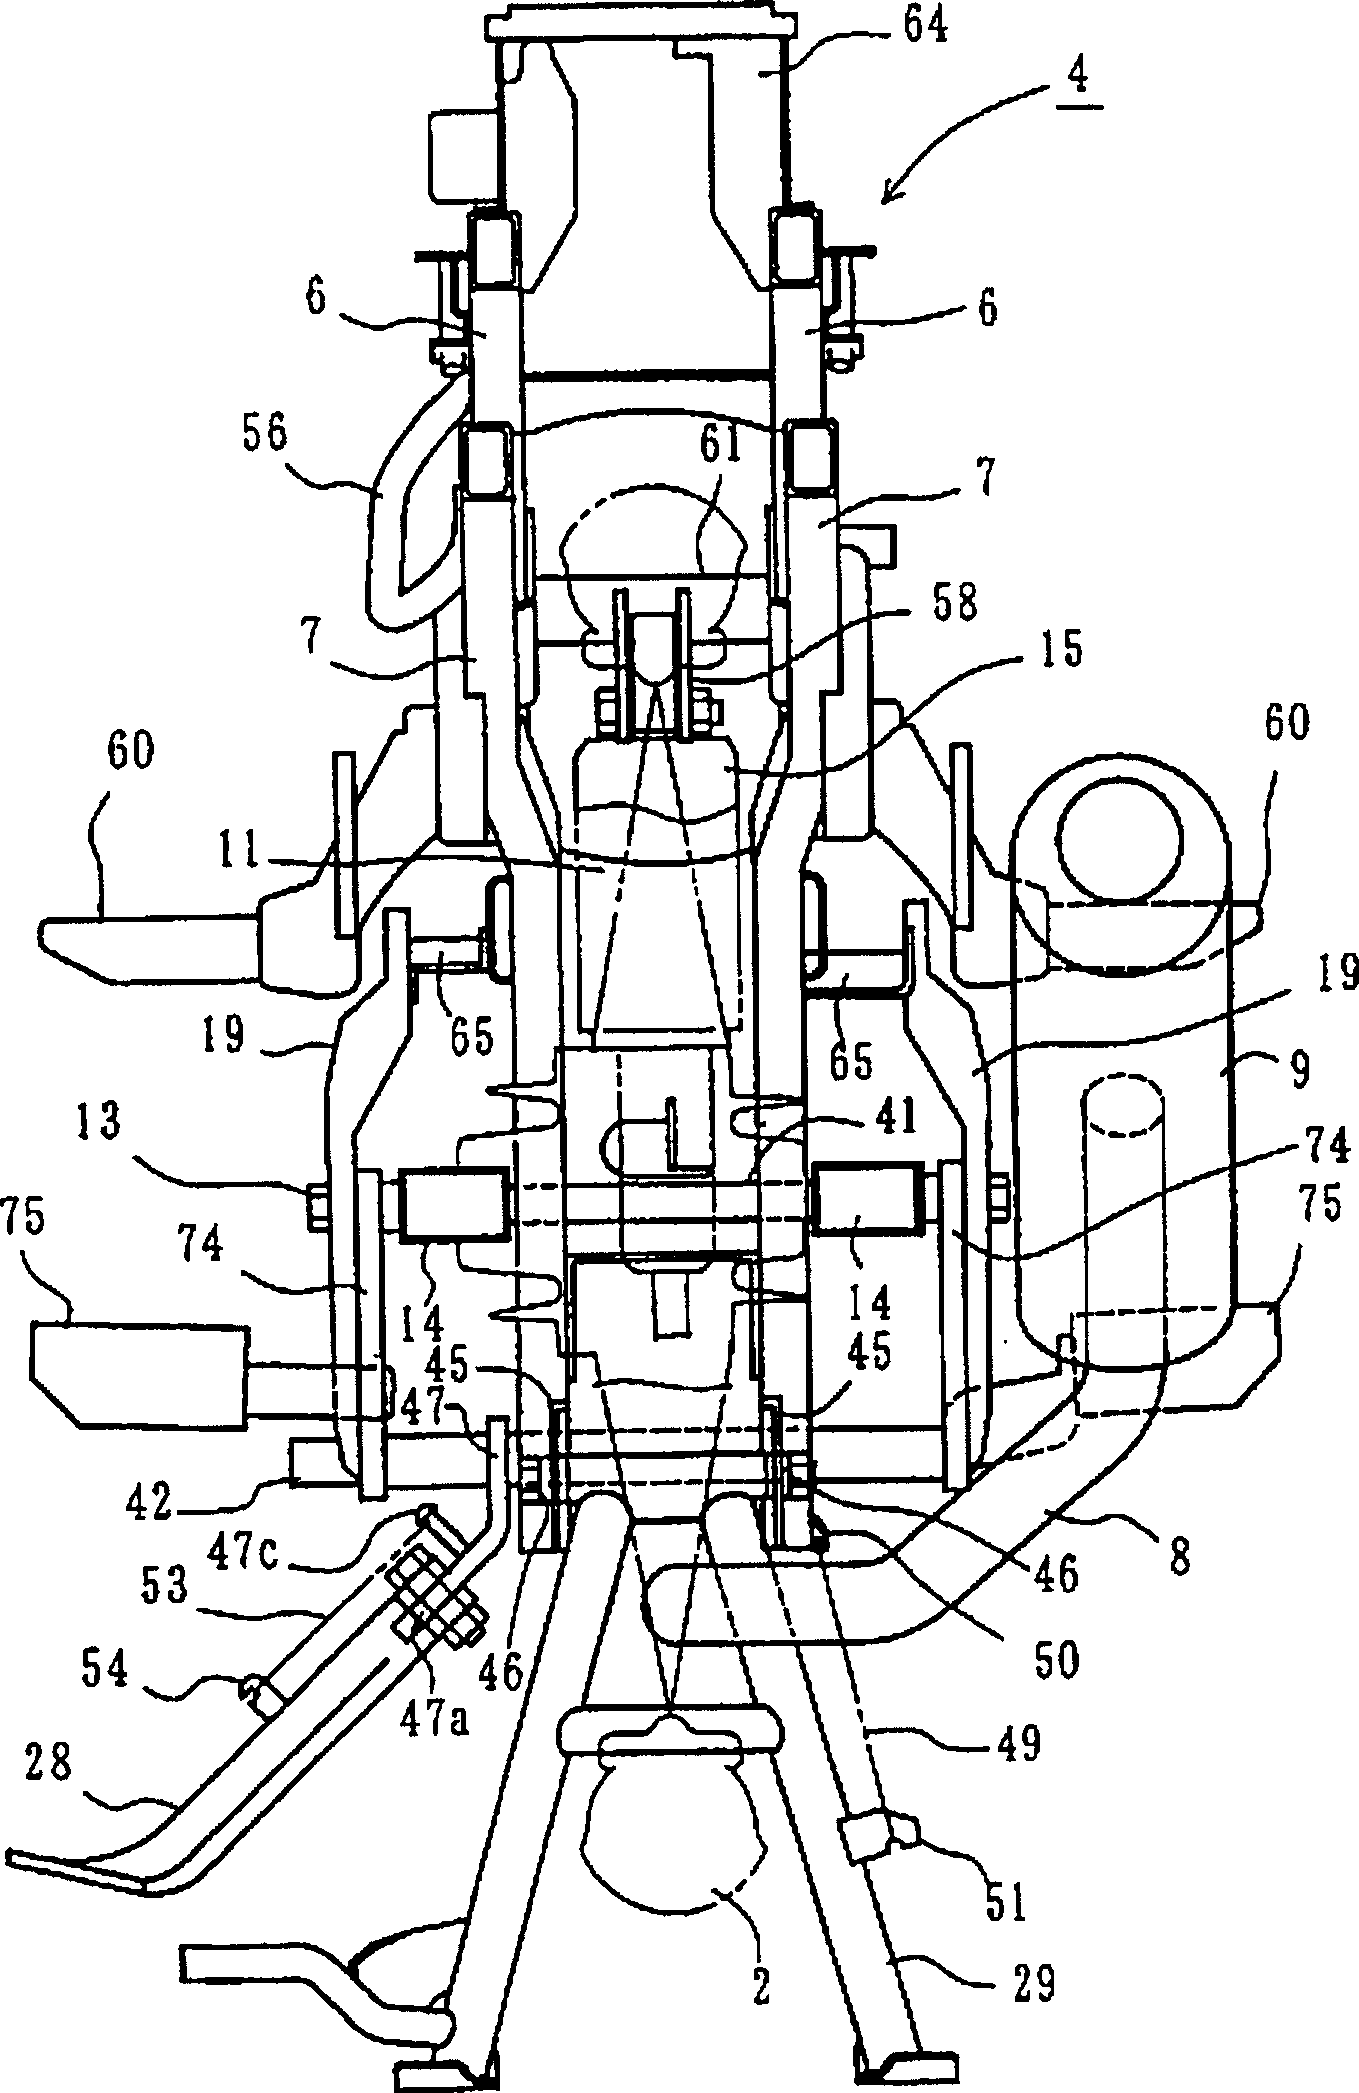 Frame structure of motor bicycle